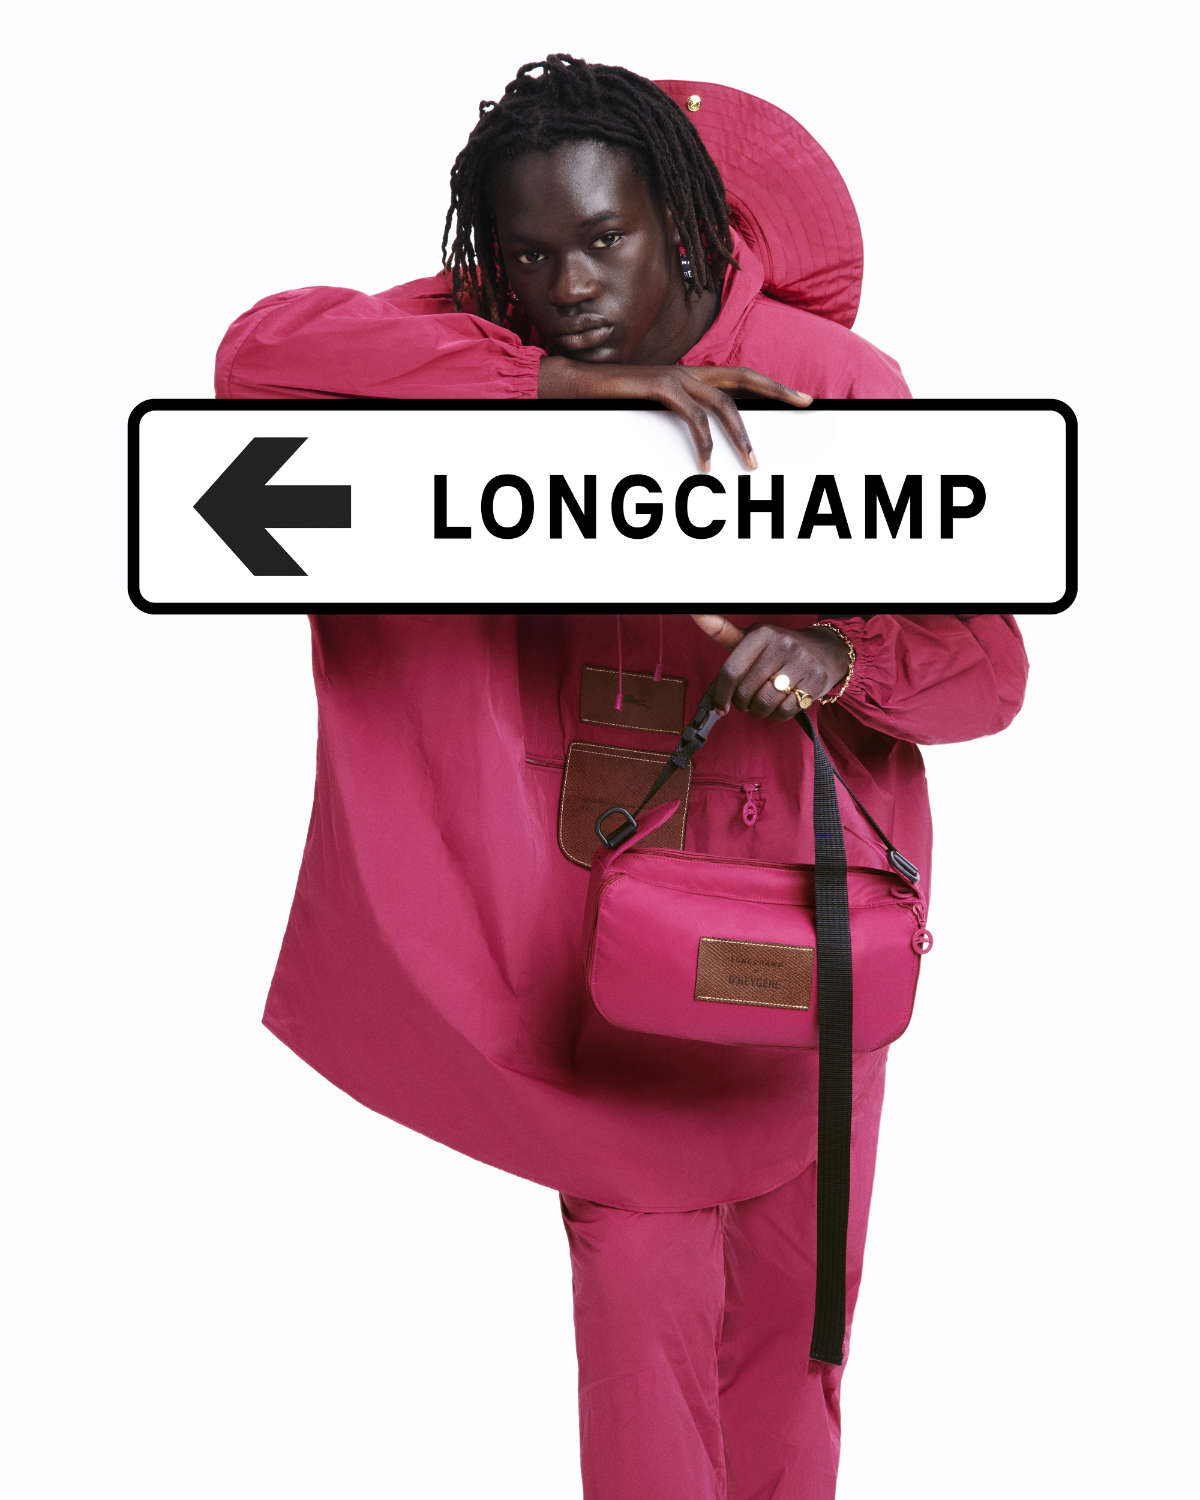 Longchamp & D’heygere - The Ingenious Collaboration That Transforms The Everyday